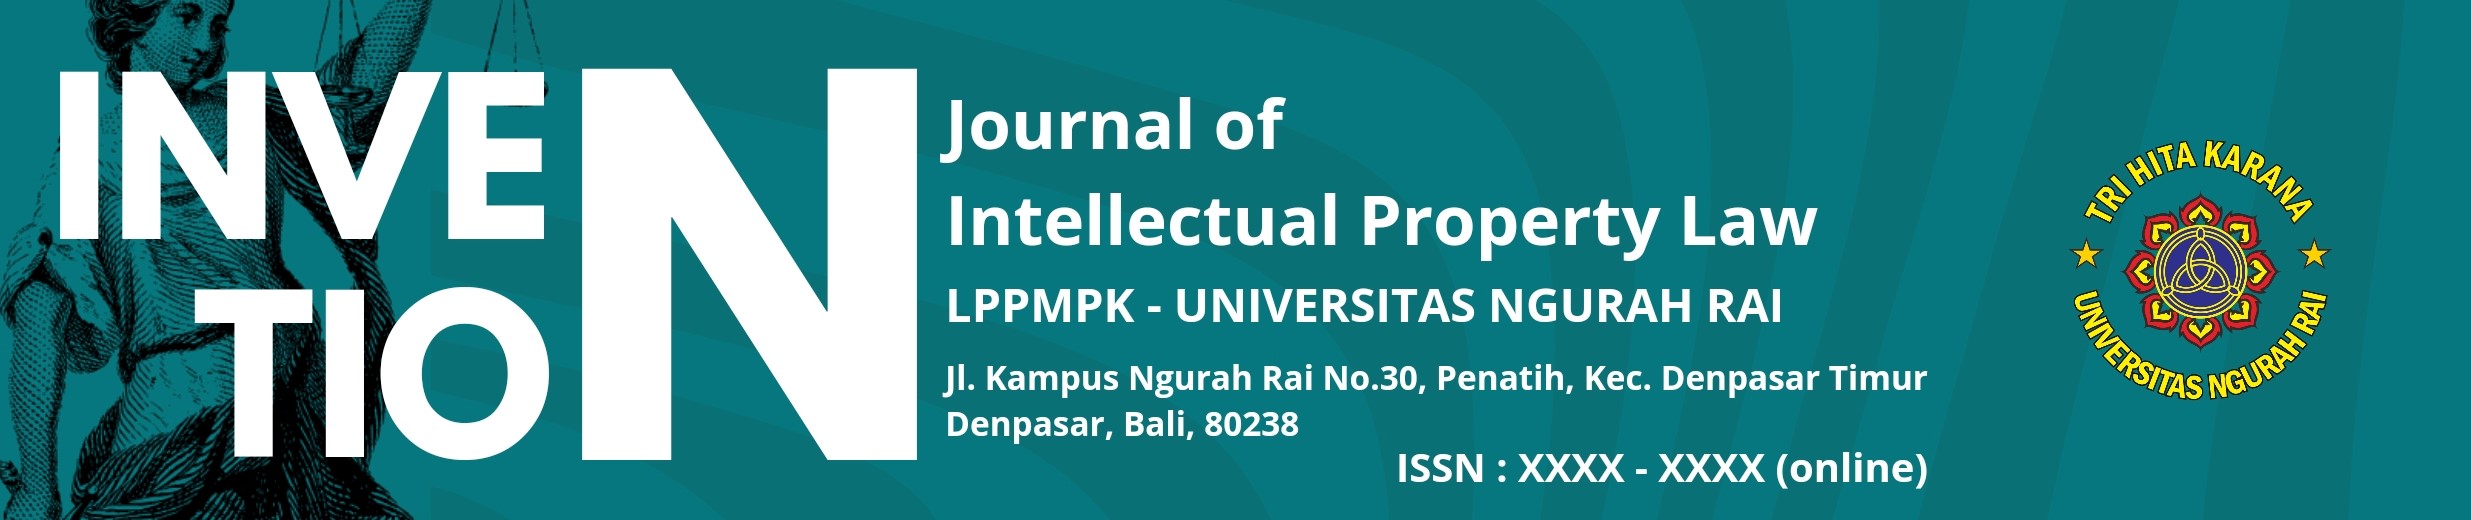 invention: journal of intellectual property